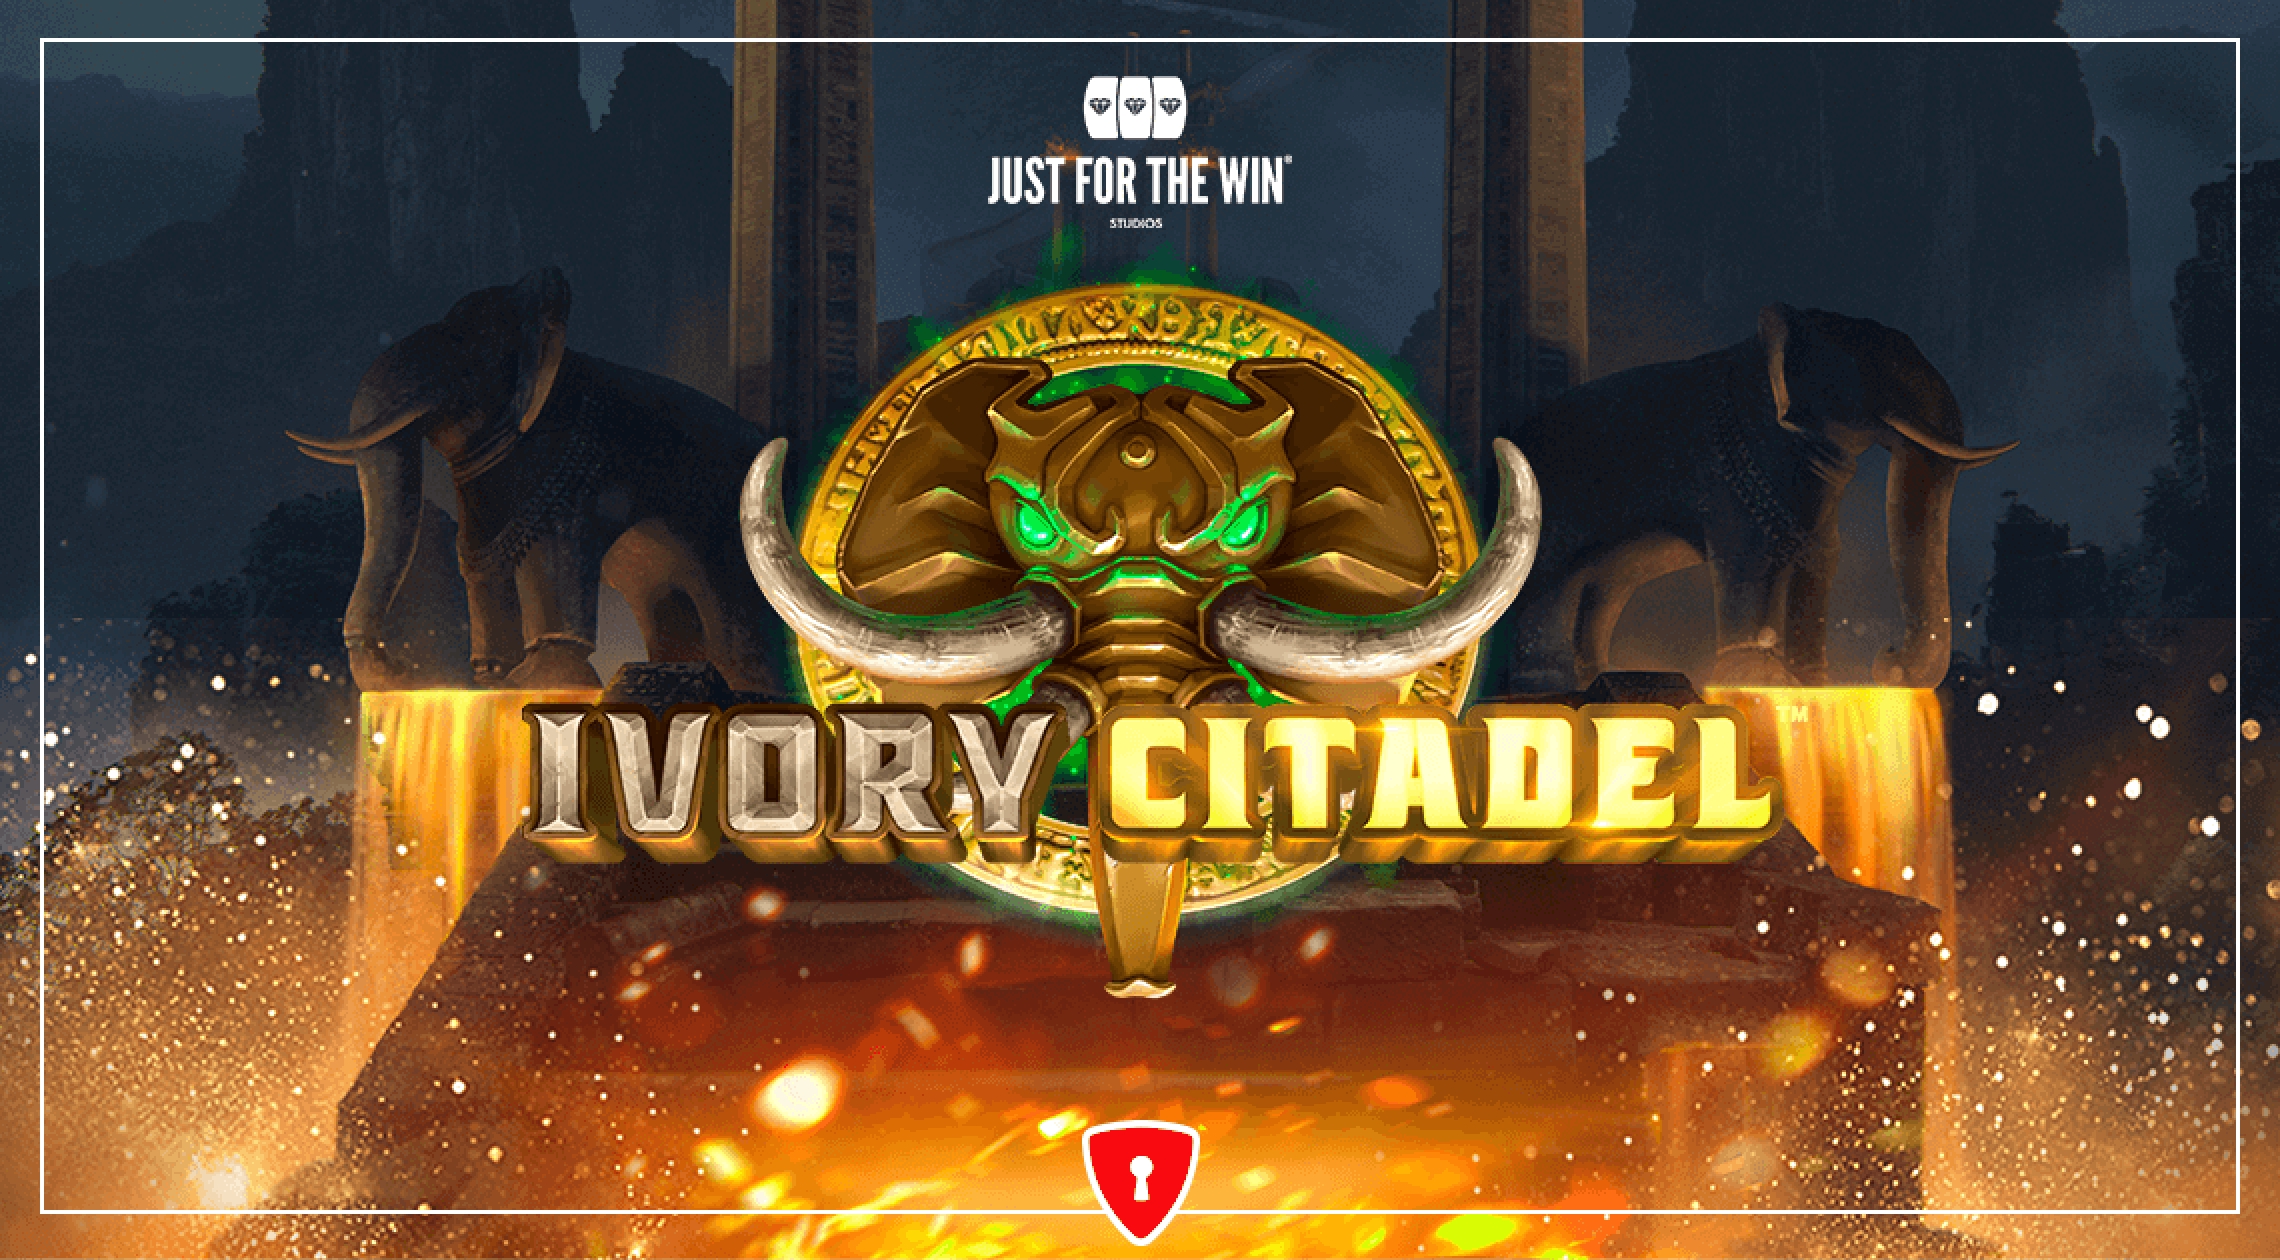 The Ivory Citadel Online Slot Demo Game by Just For The Win